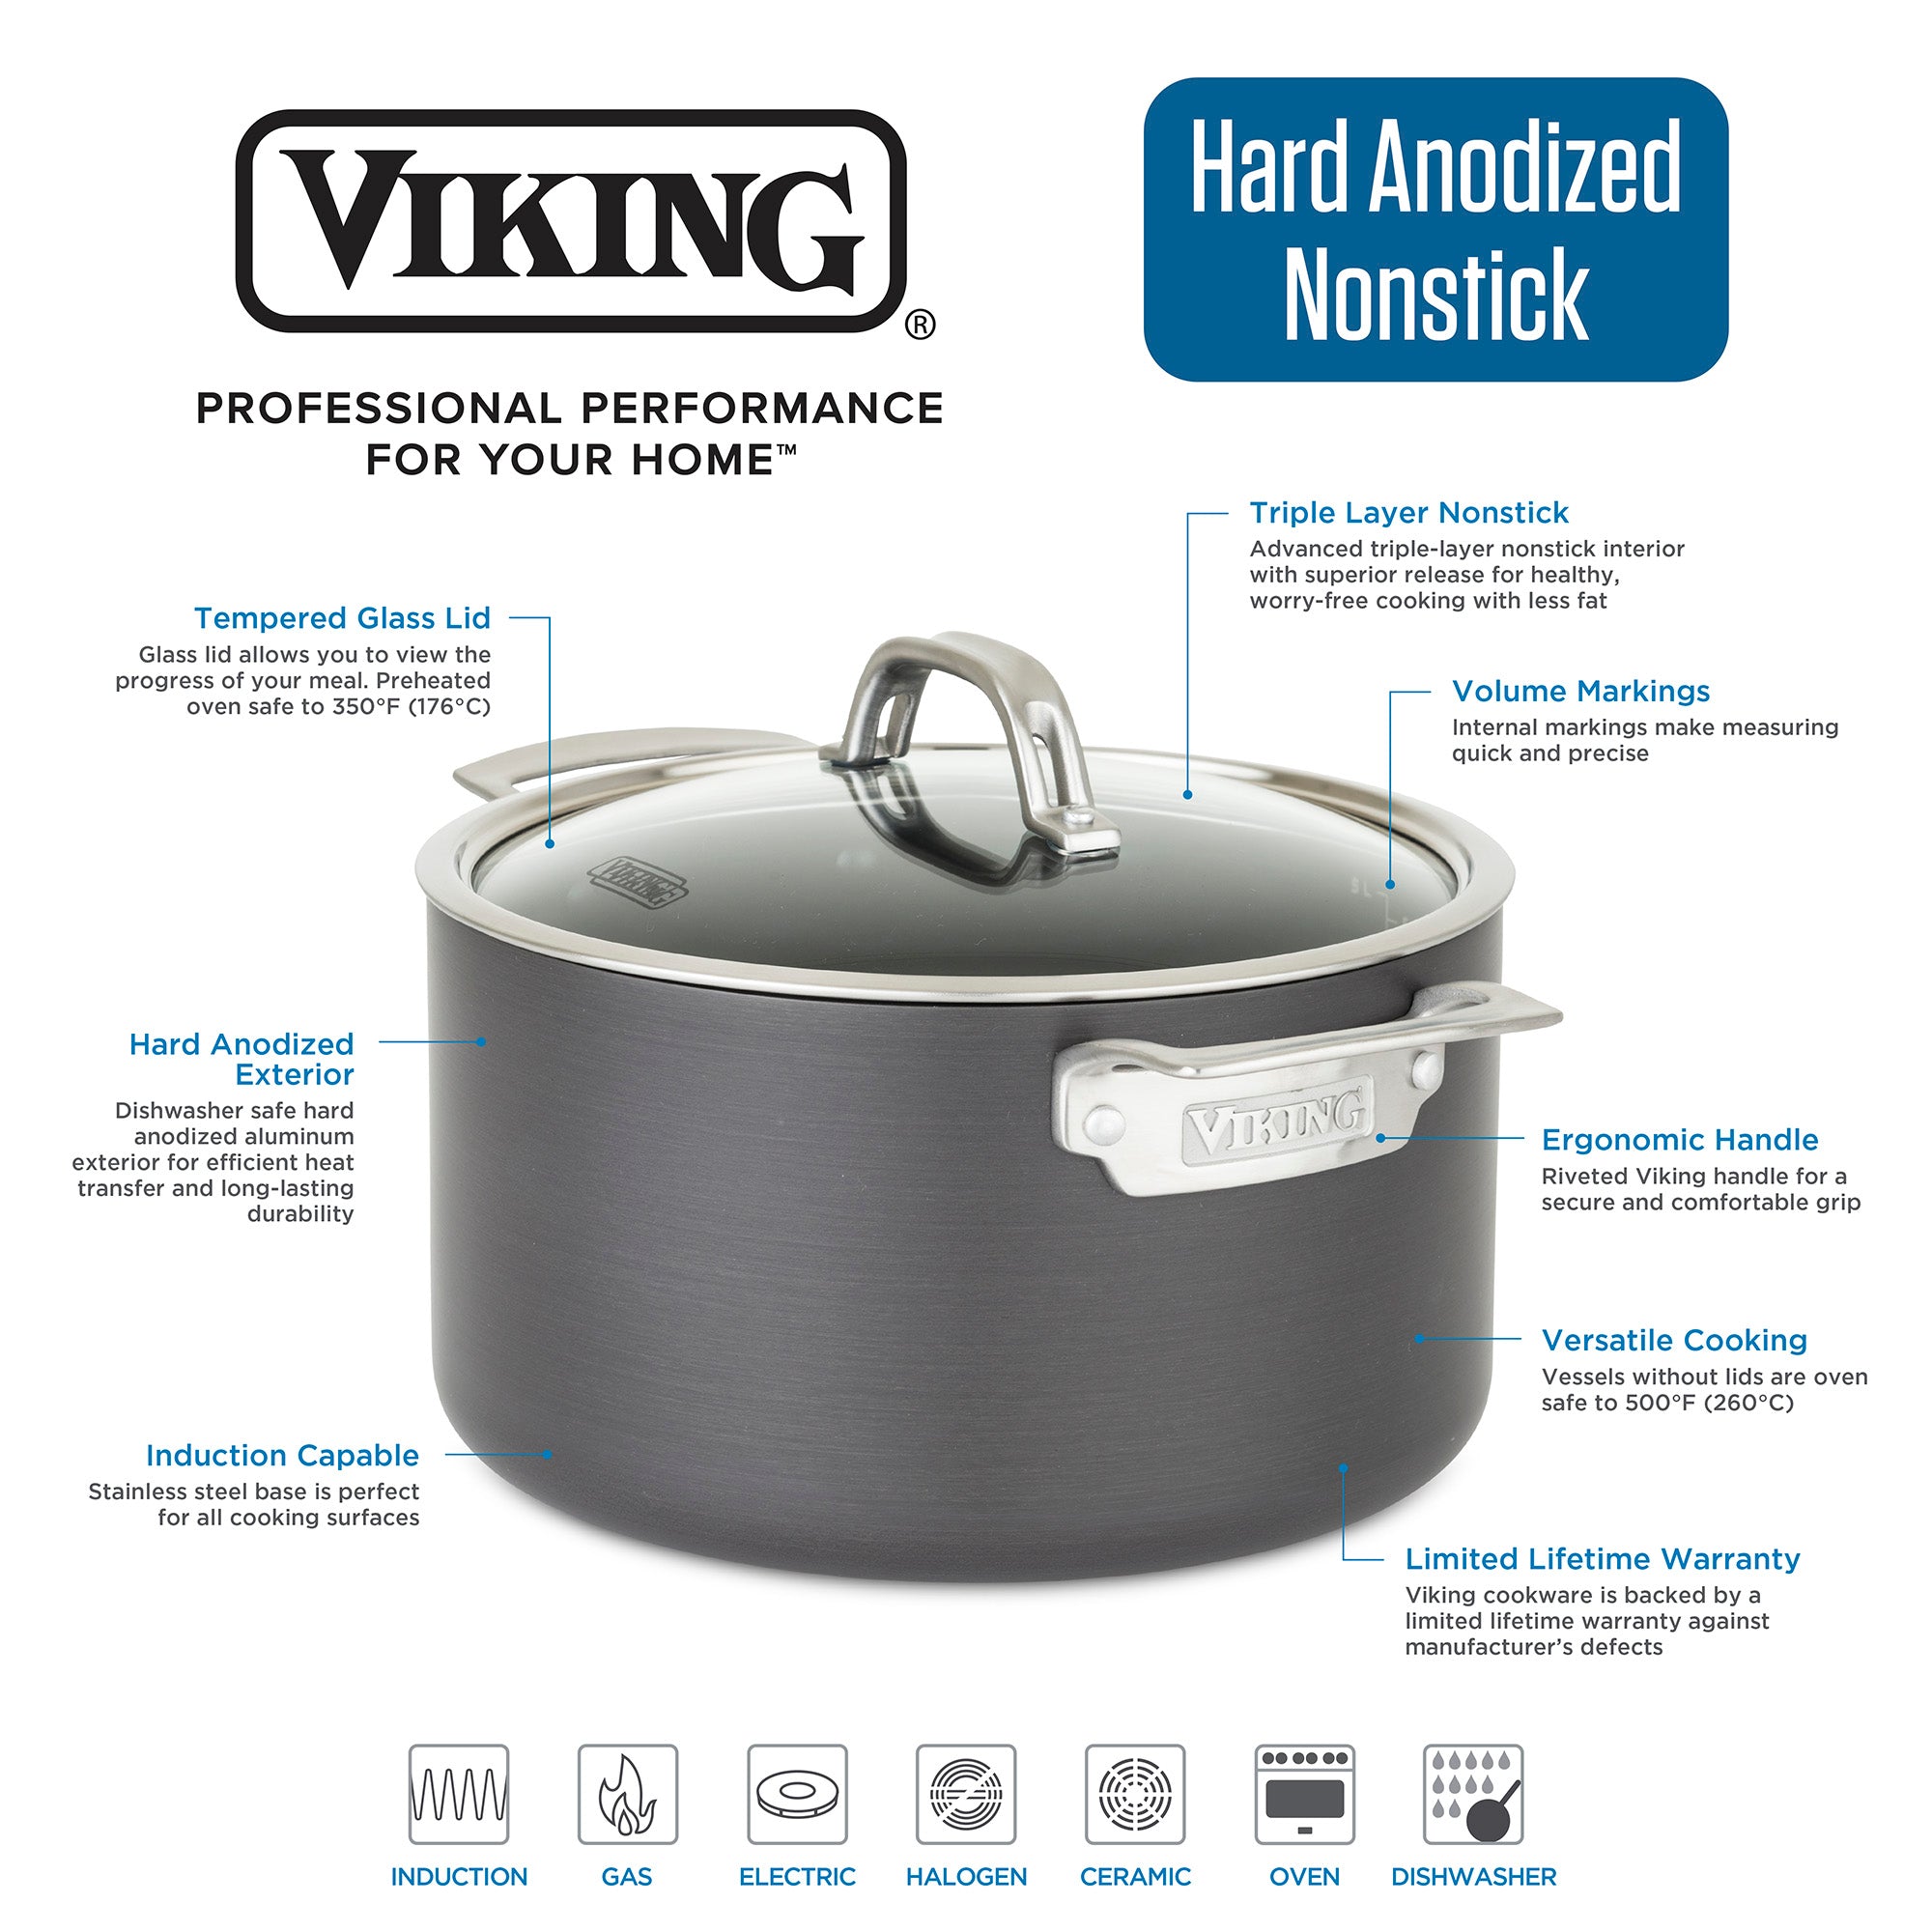 Viking Hard Anodized Nonstick 8-Quart Stock Pot with Glass Lid